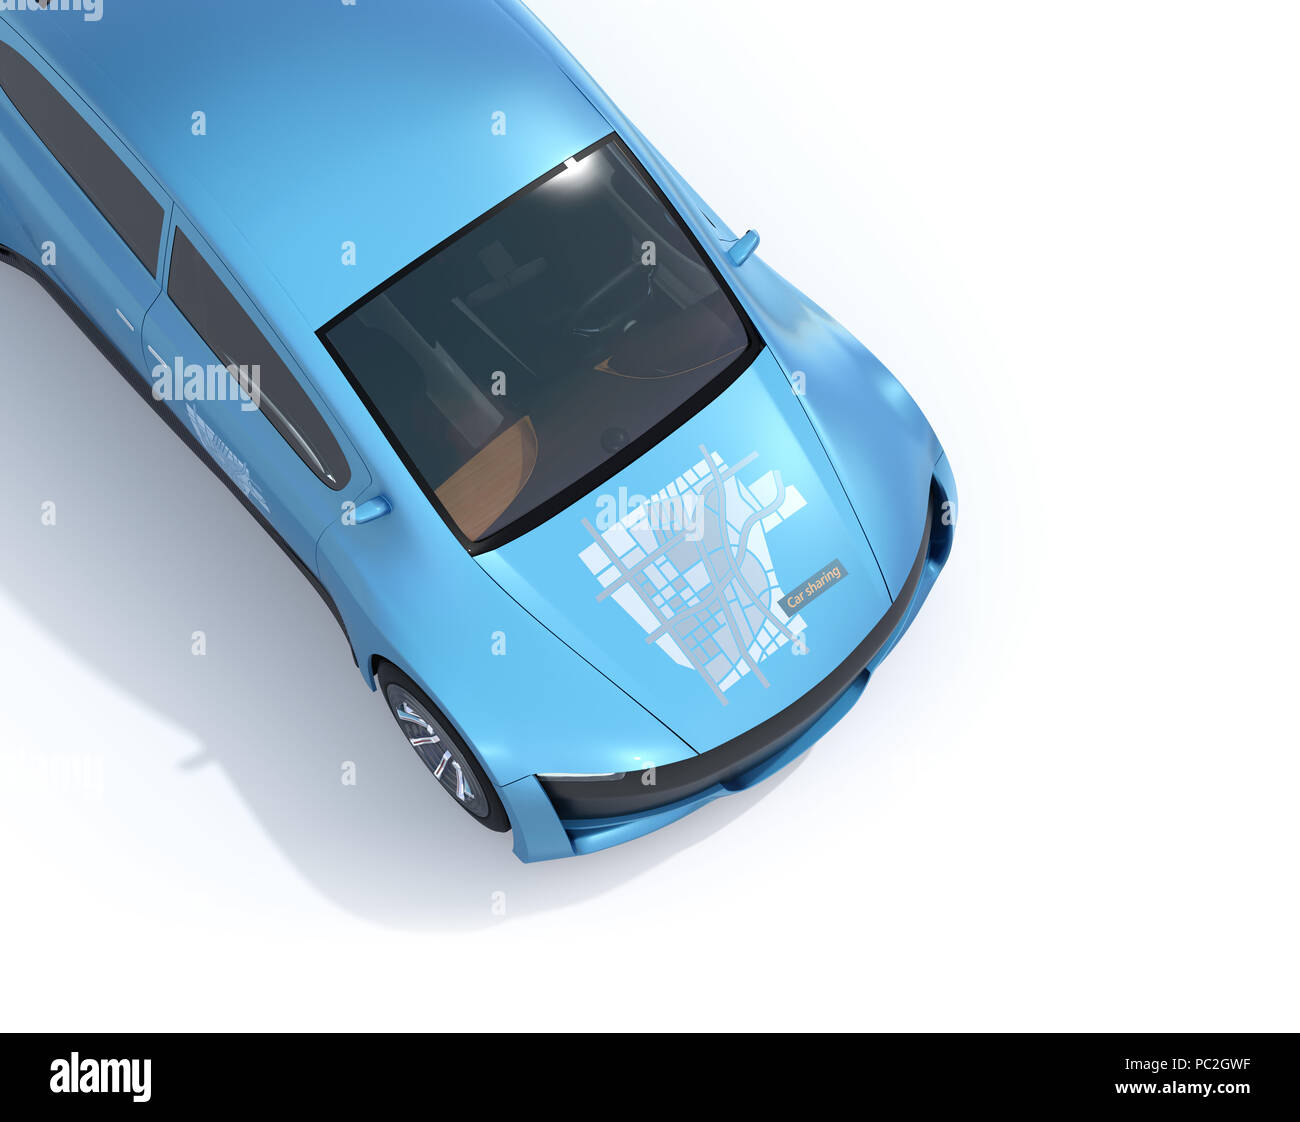 Close-up view of metallic blue electric car isolated on white background. Car sharing graphic on the hood. 3D rendering image. Stock Photo